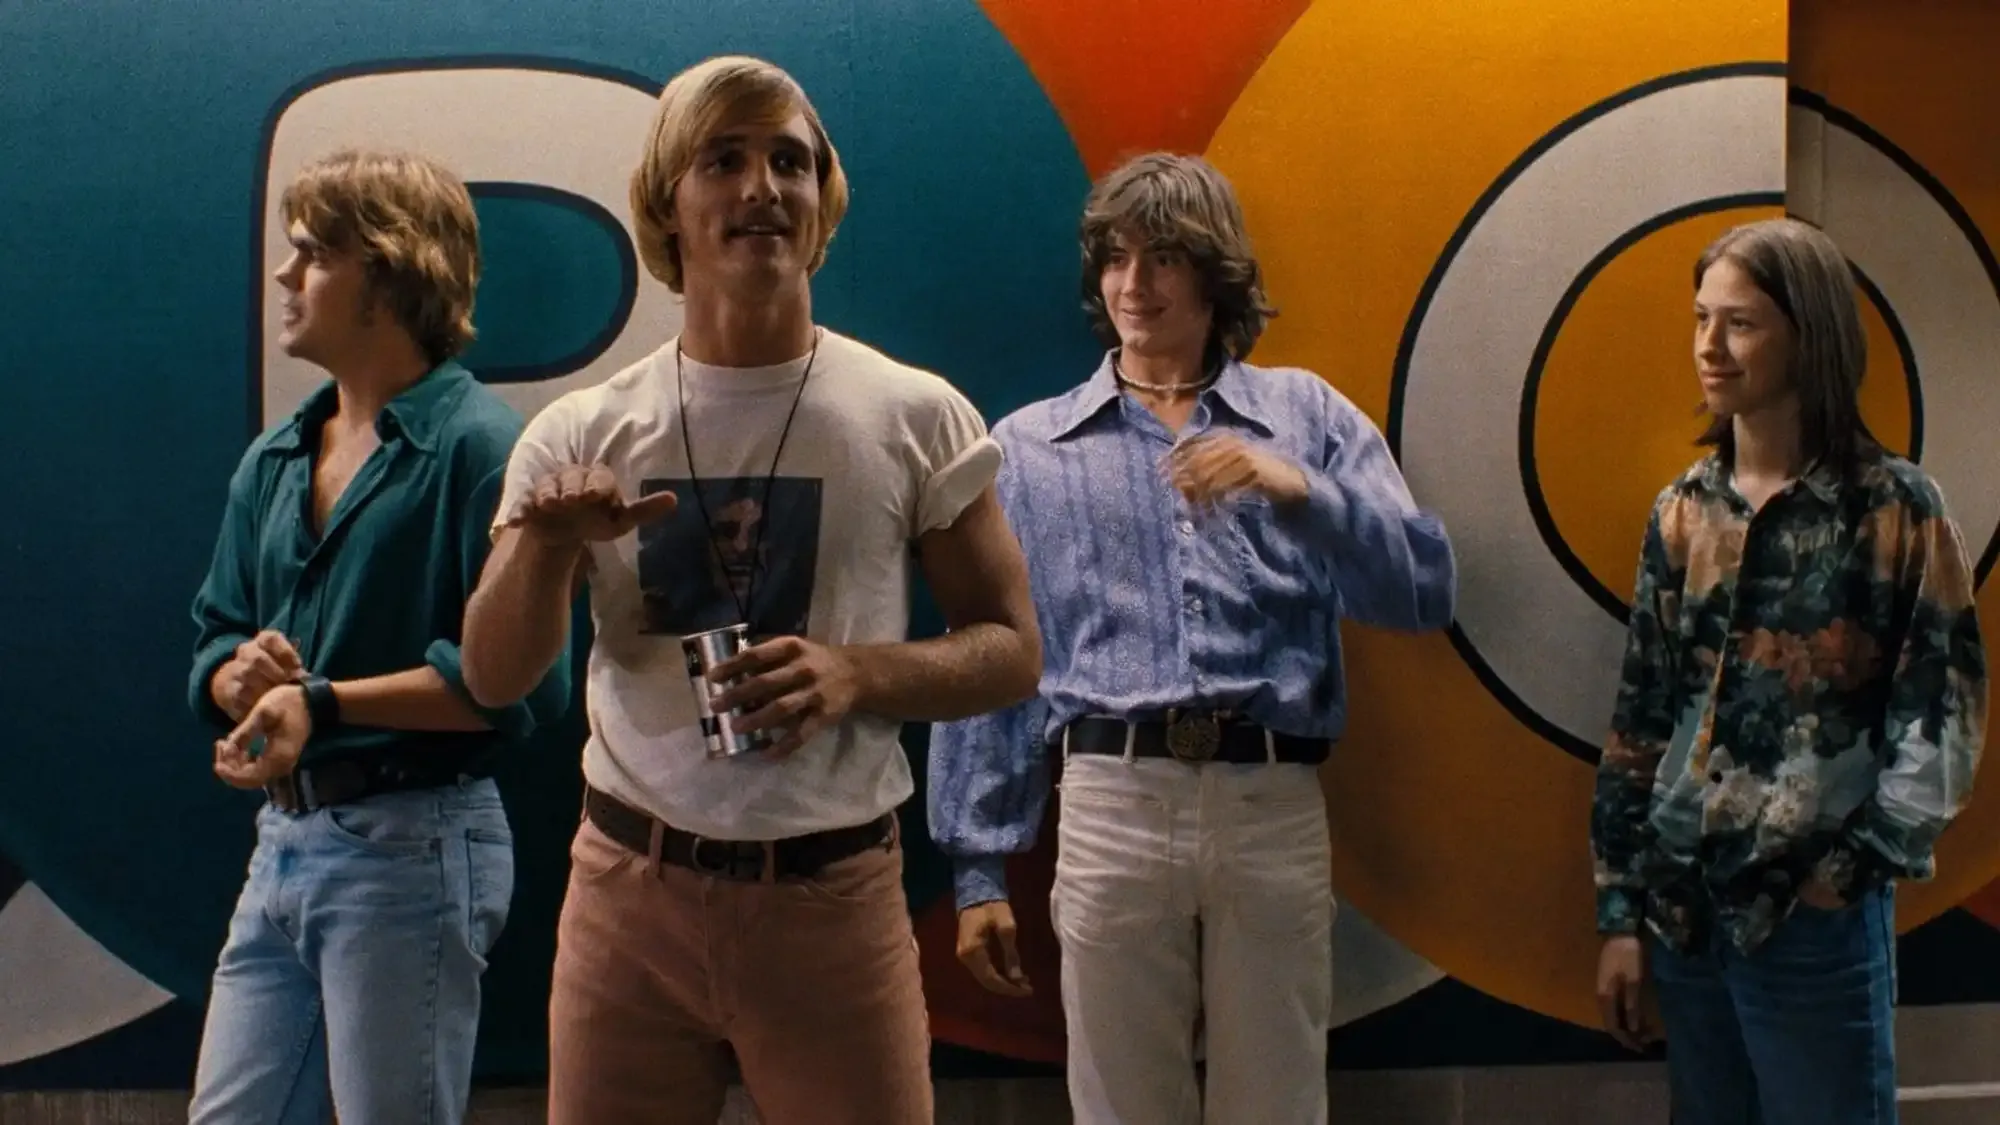 Dazed and Confused movie review